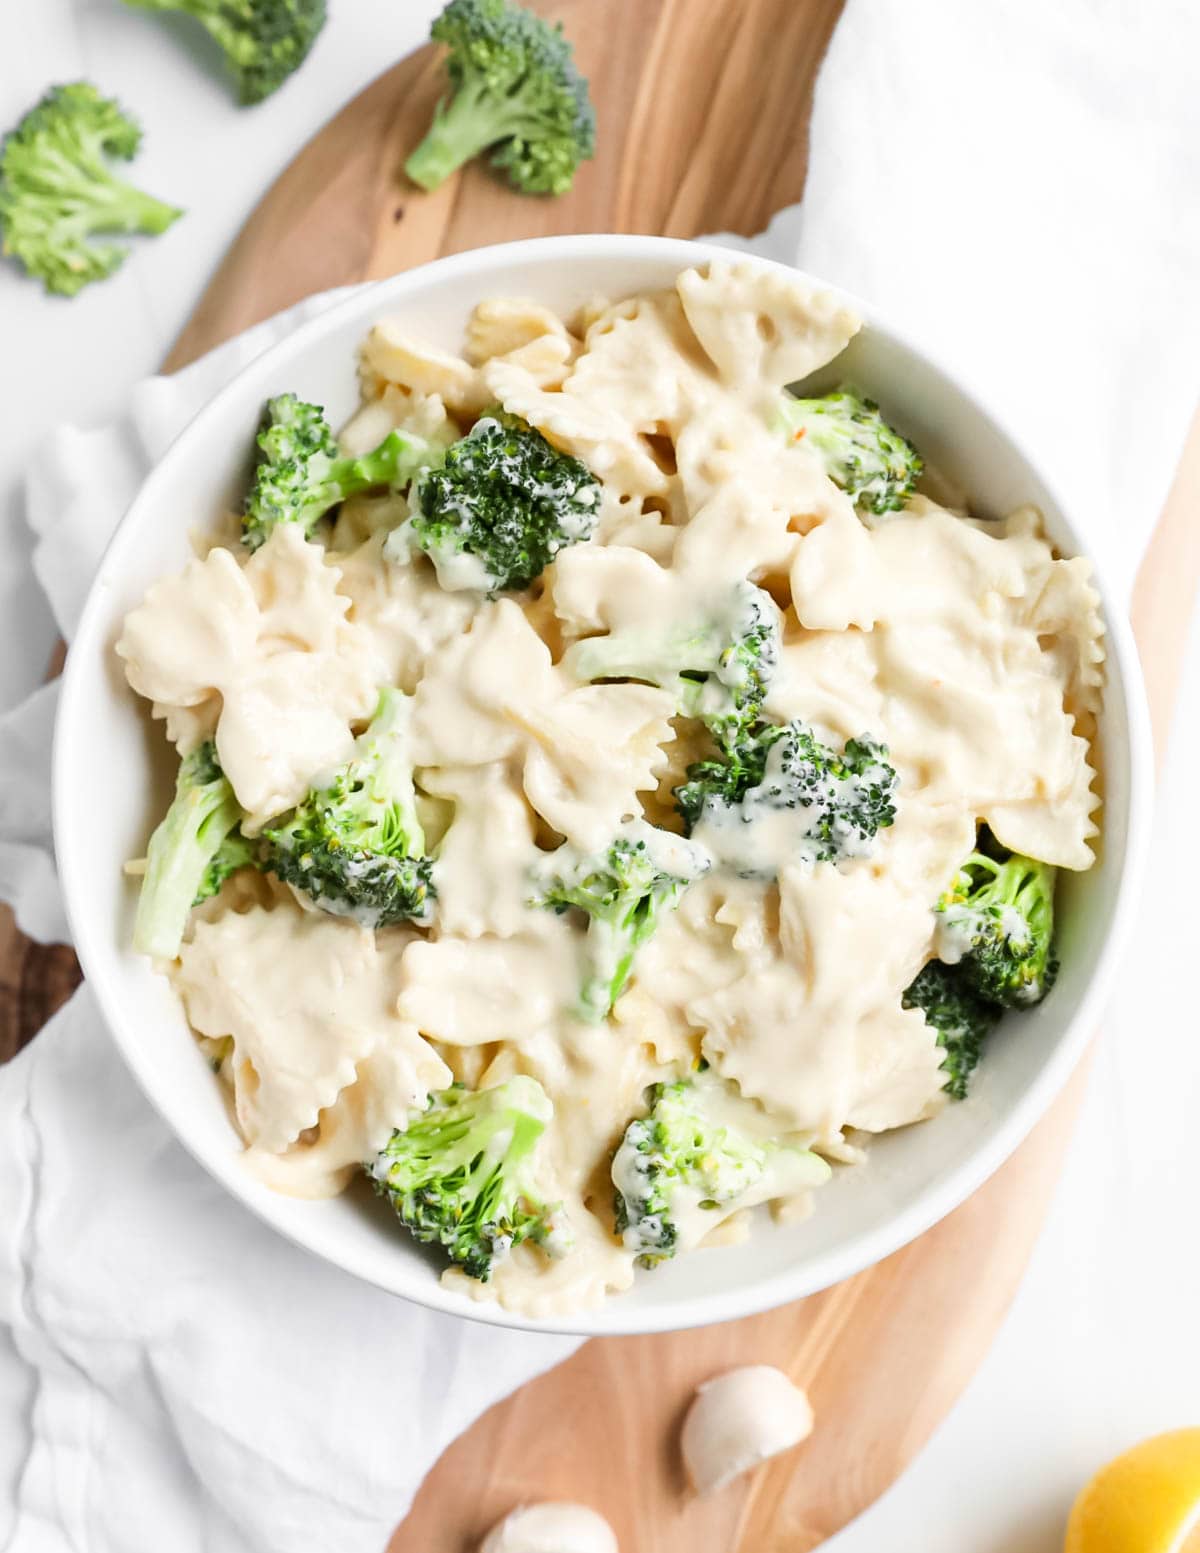 A bowl filled with creamy pasta with broccoli florets.